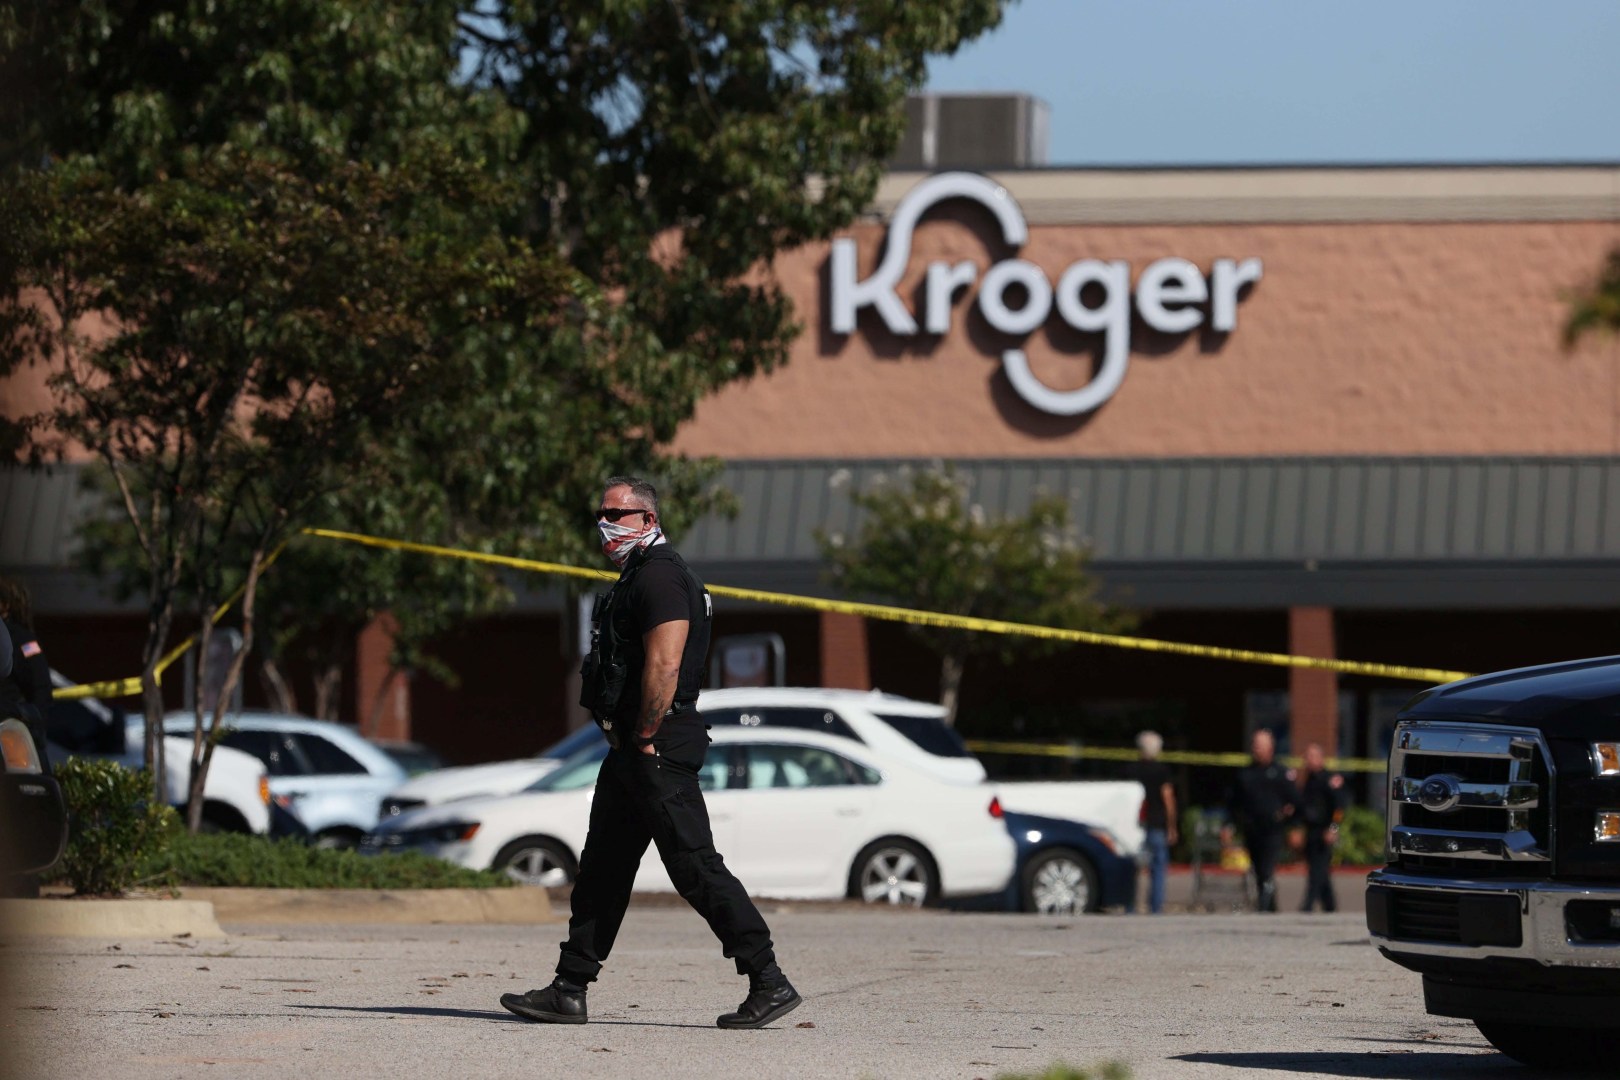 A grocery store shooting in Tennessee left one person dead.